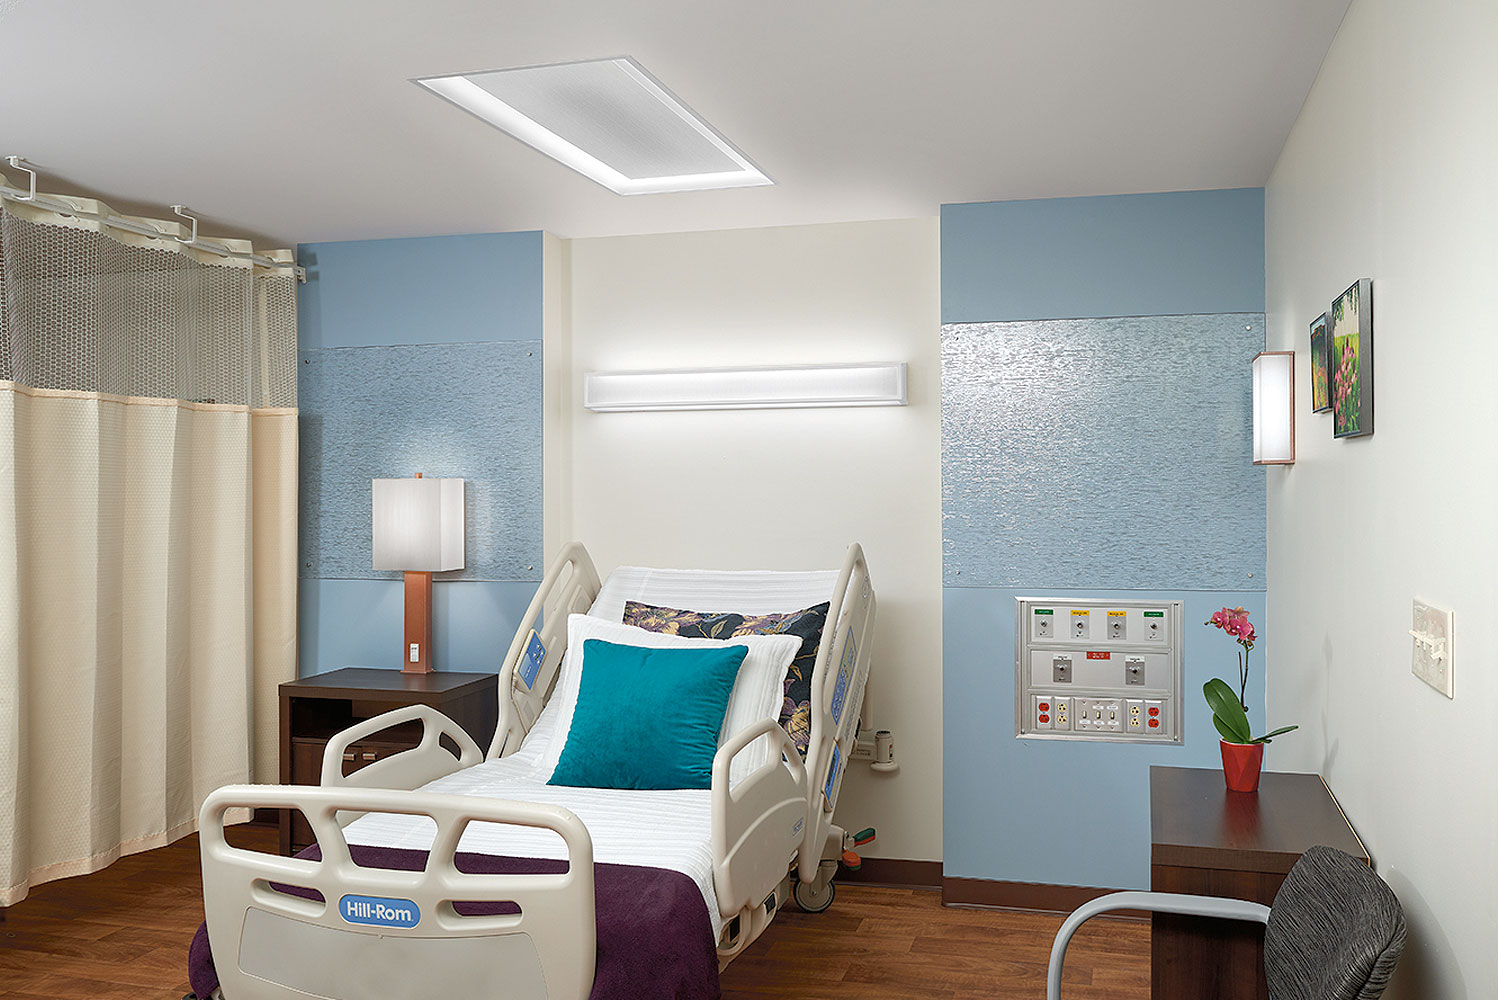 Serenity Overbed Light Above Patient Bed, headwall